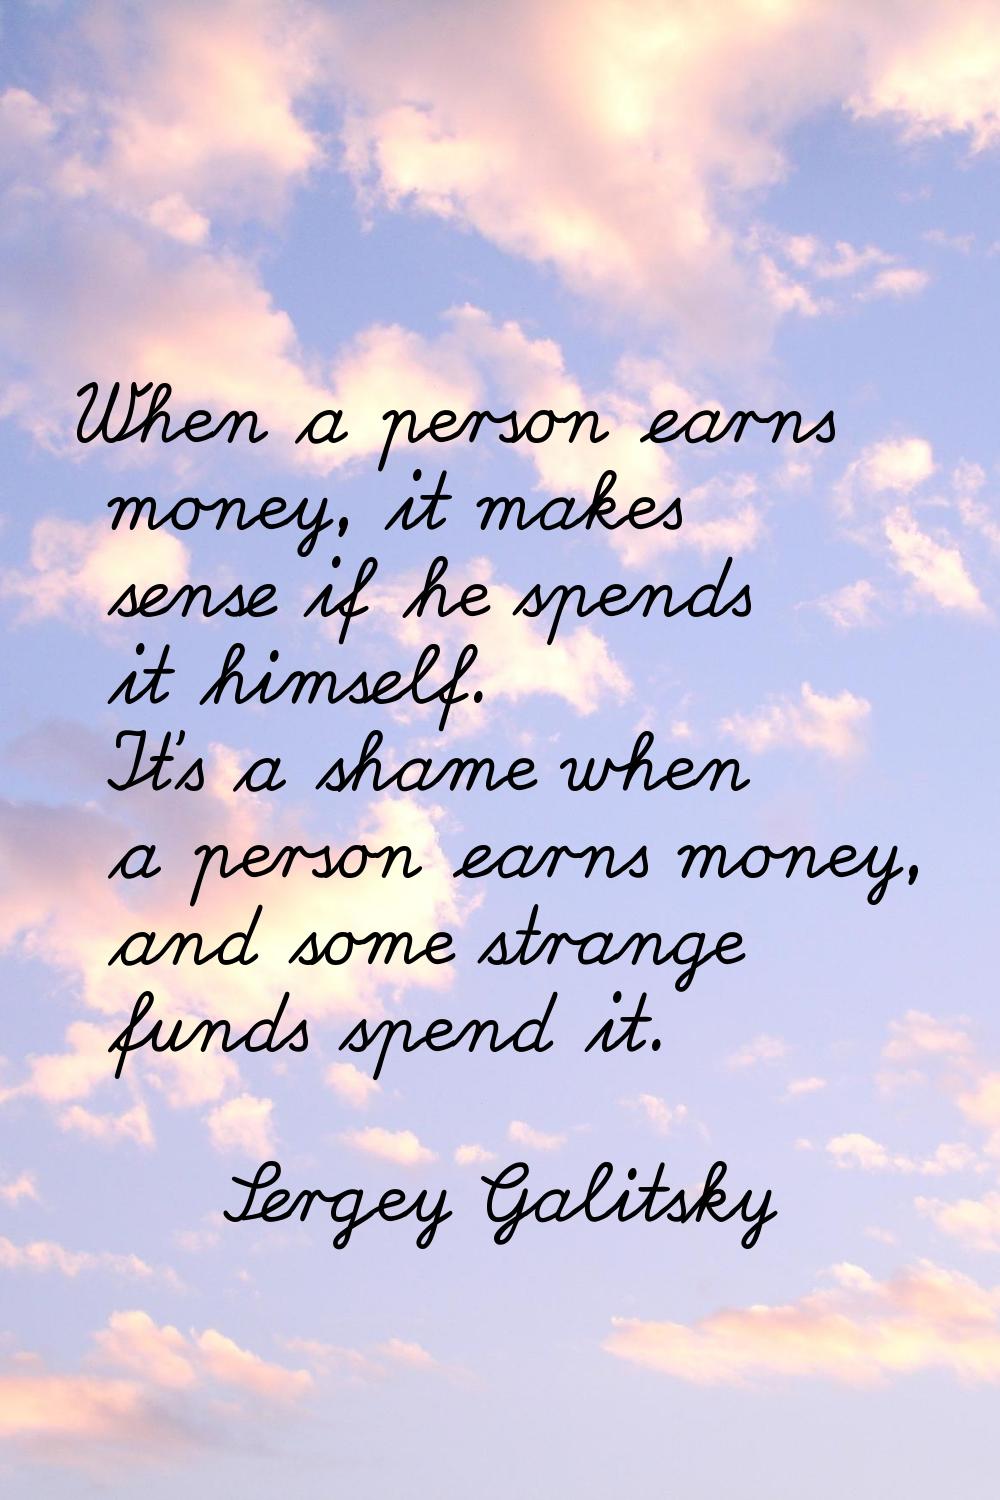 When a person earns money, it makes sense if he spends it himself. It's a shame when a person earns